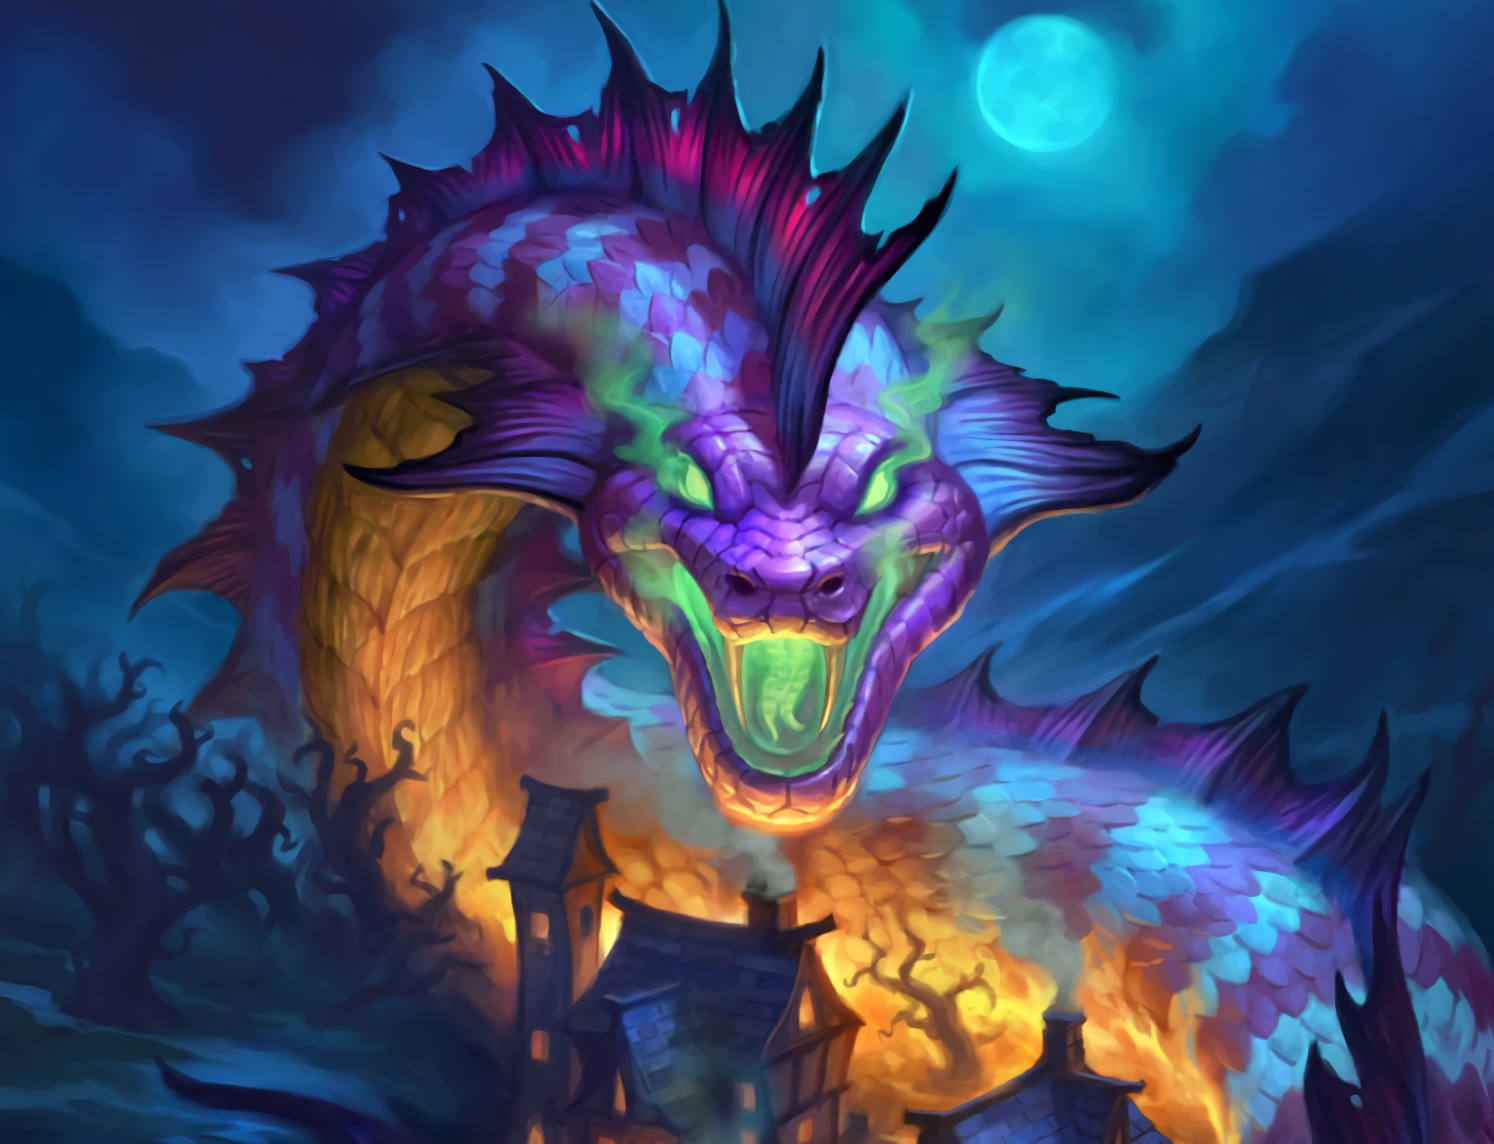 Hearthstone: Genn, Baku, Doomguard hit the Hall of Fame and new Solo Adventures await in the Year of the Dragon